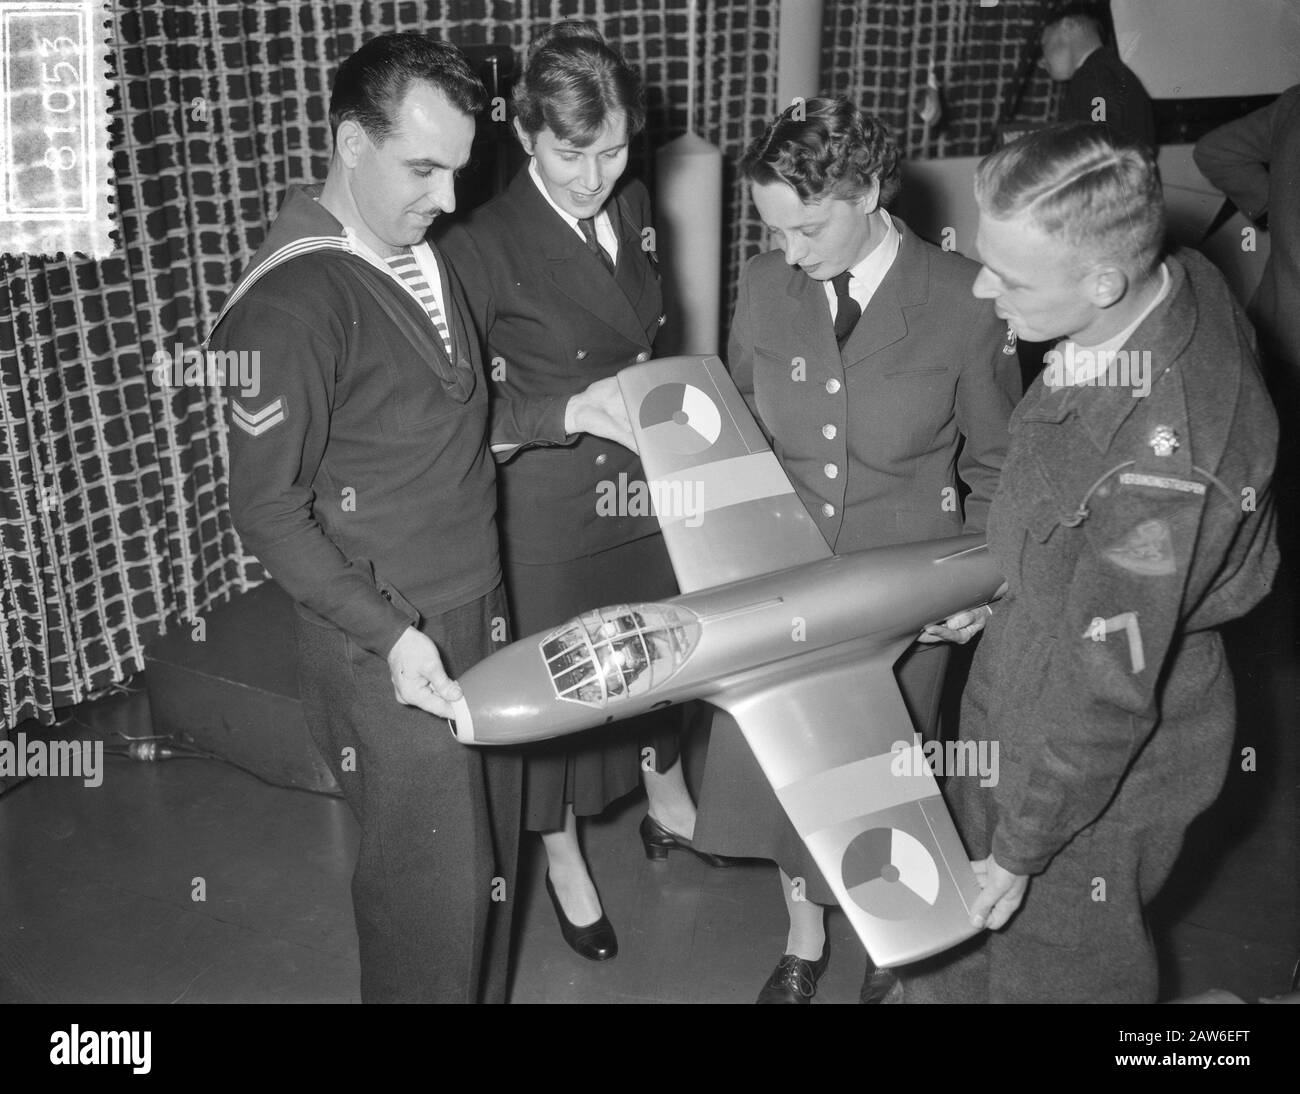 Dutch championships aircraft recognition at Shell Hague, sailor, Marva and lieutenants of the air forces, vlliegtuigmodel Date: October 27, 1956 Location: The Hague, South Holland Keywords: CHAMPIONSHIPS, Sailors Institution Name: Shell Stock Photo